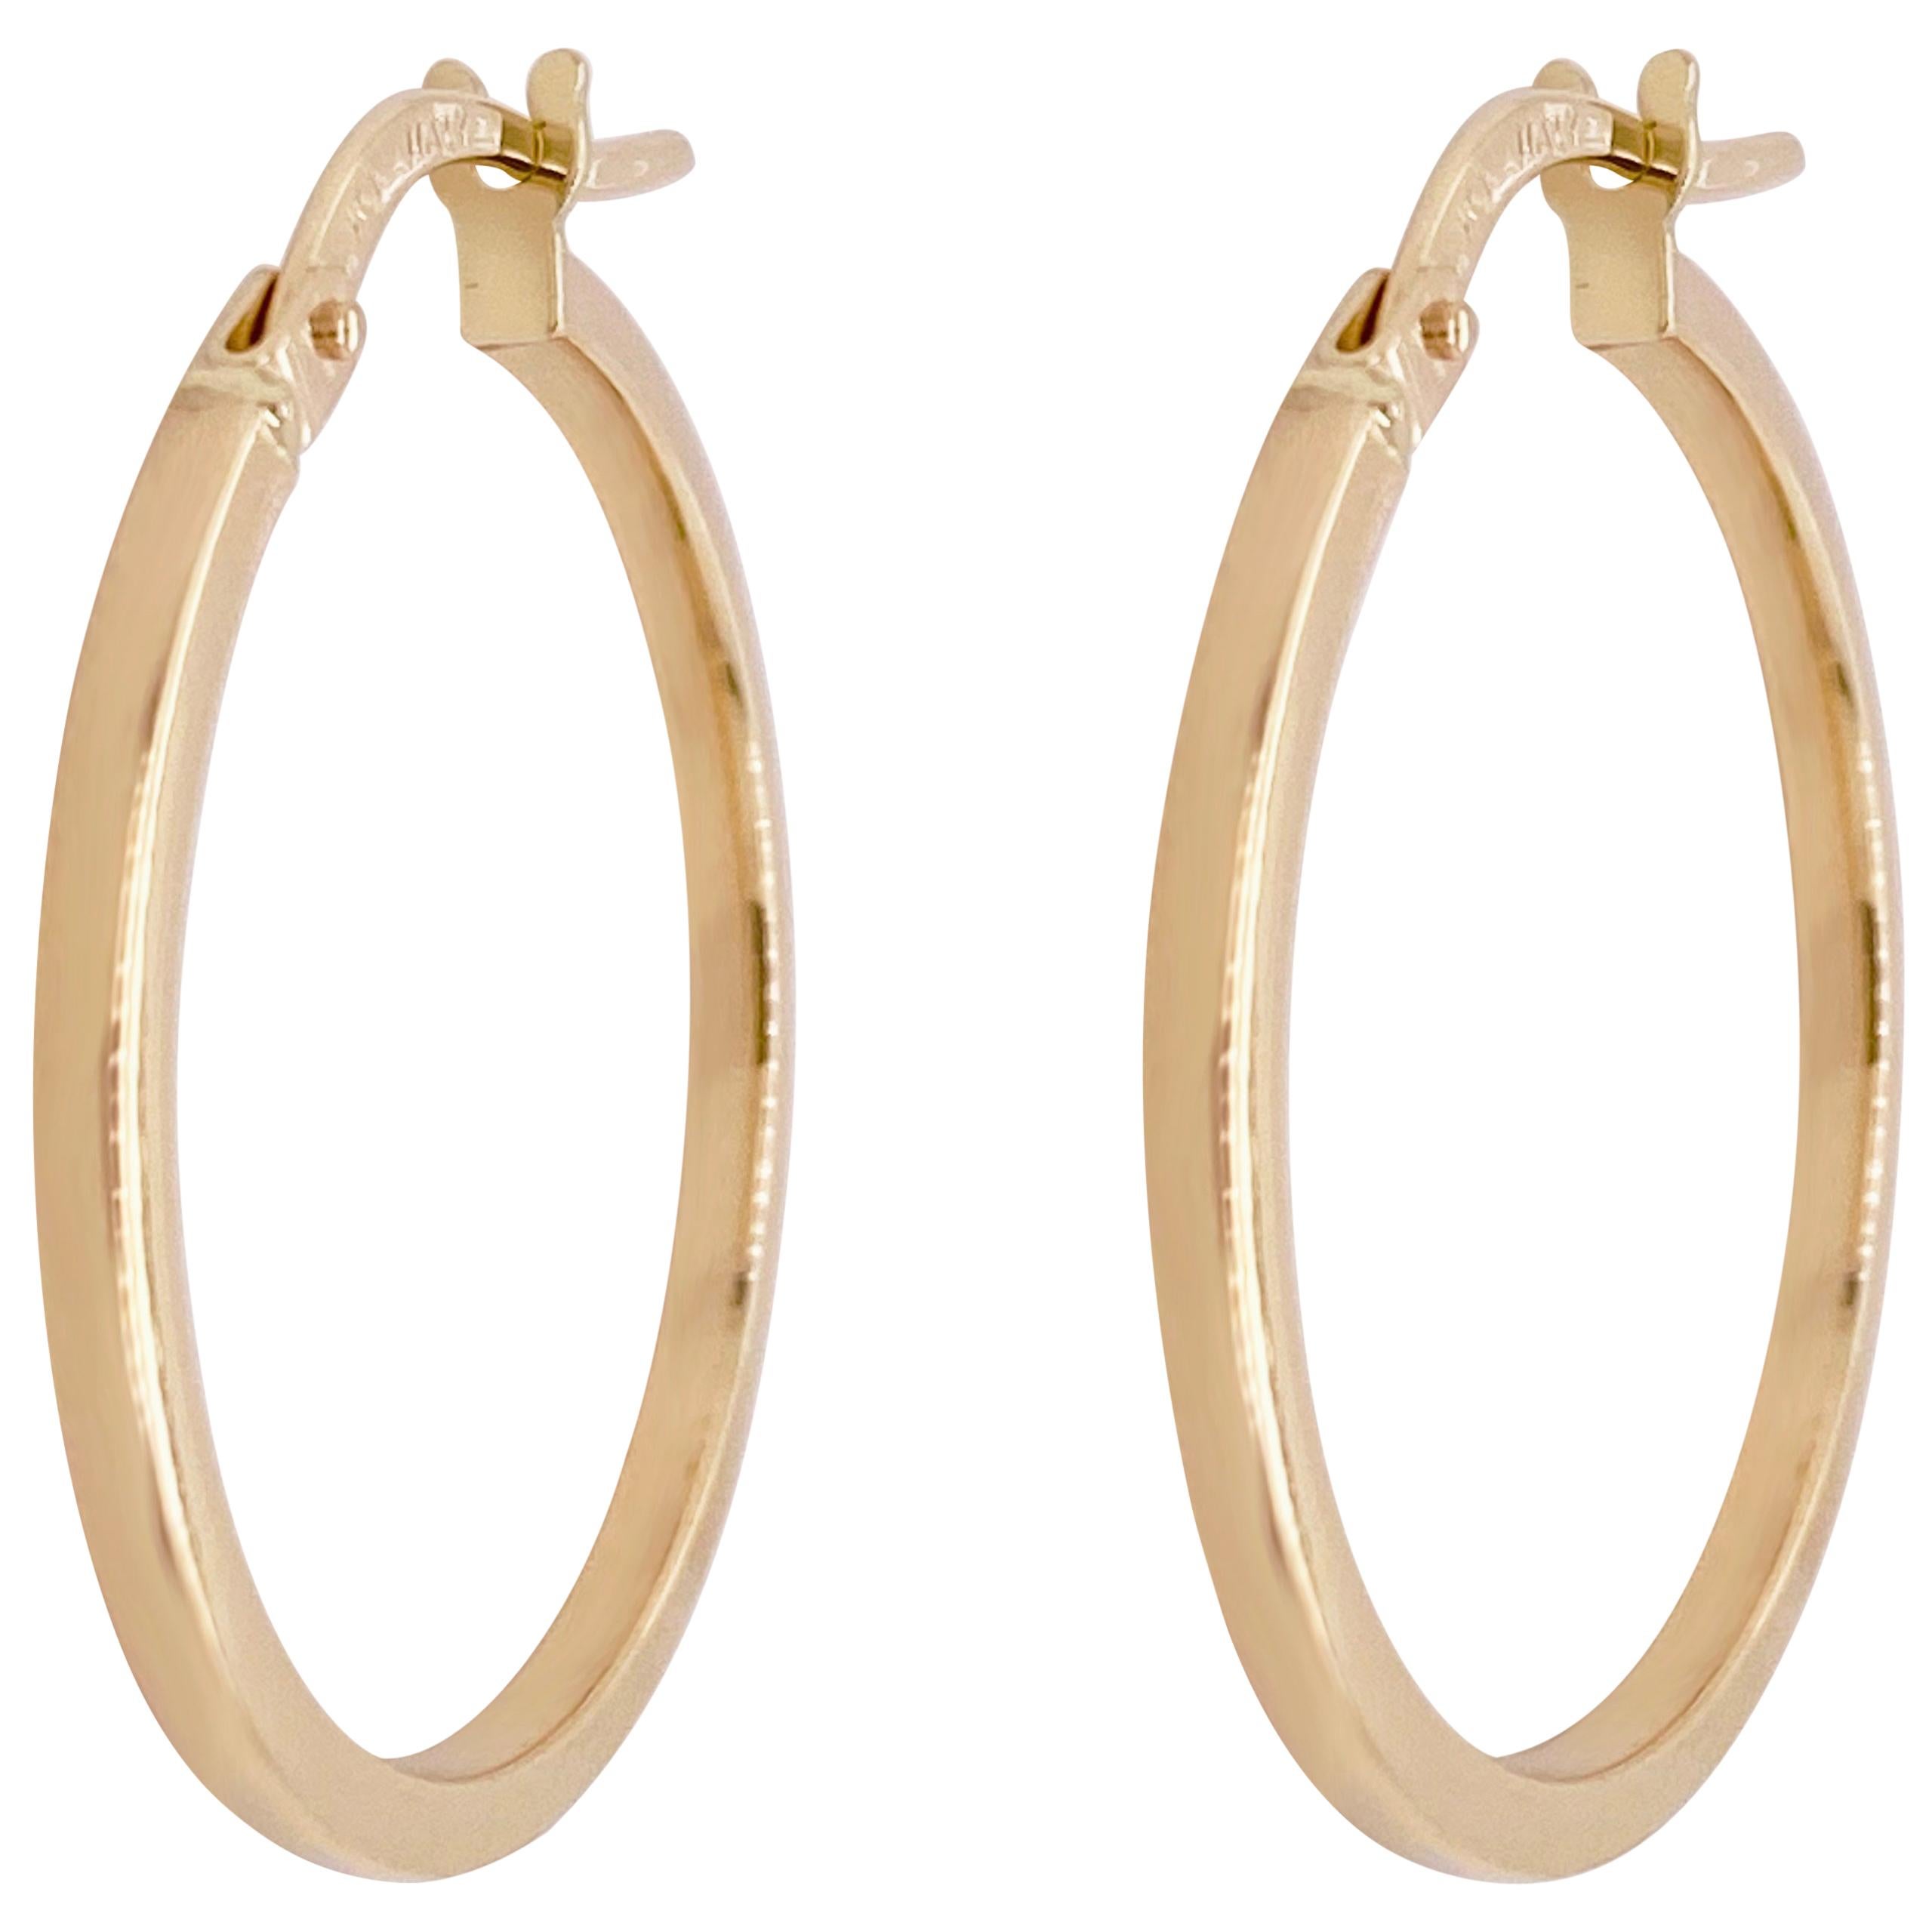 1" Gold Hoops with Square Tube Design, 14K Gold, 25mm x 2mm